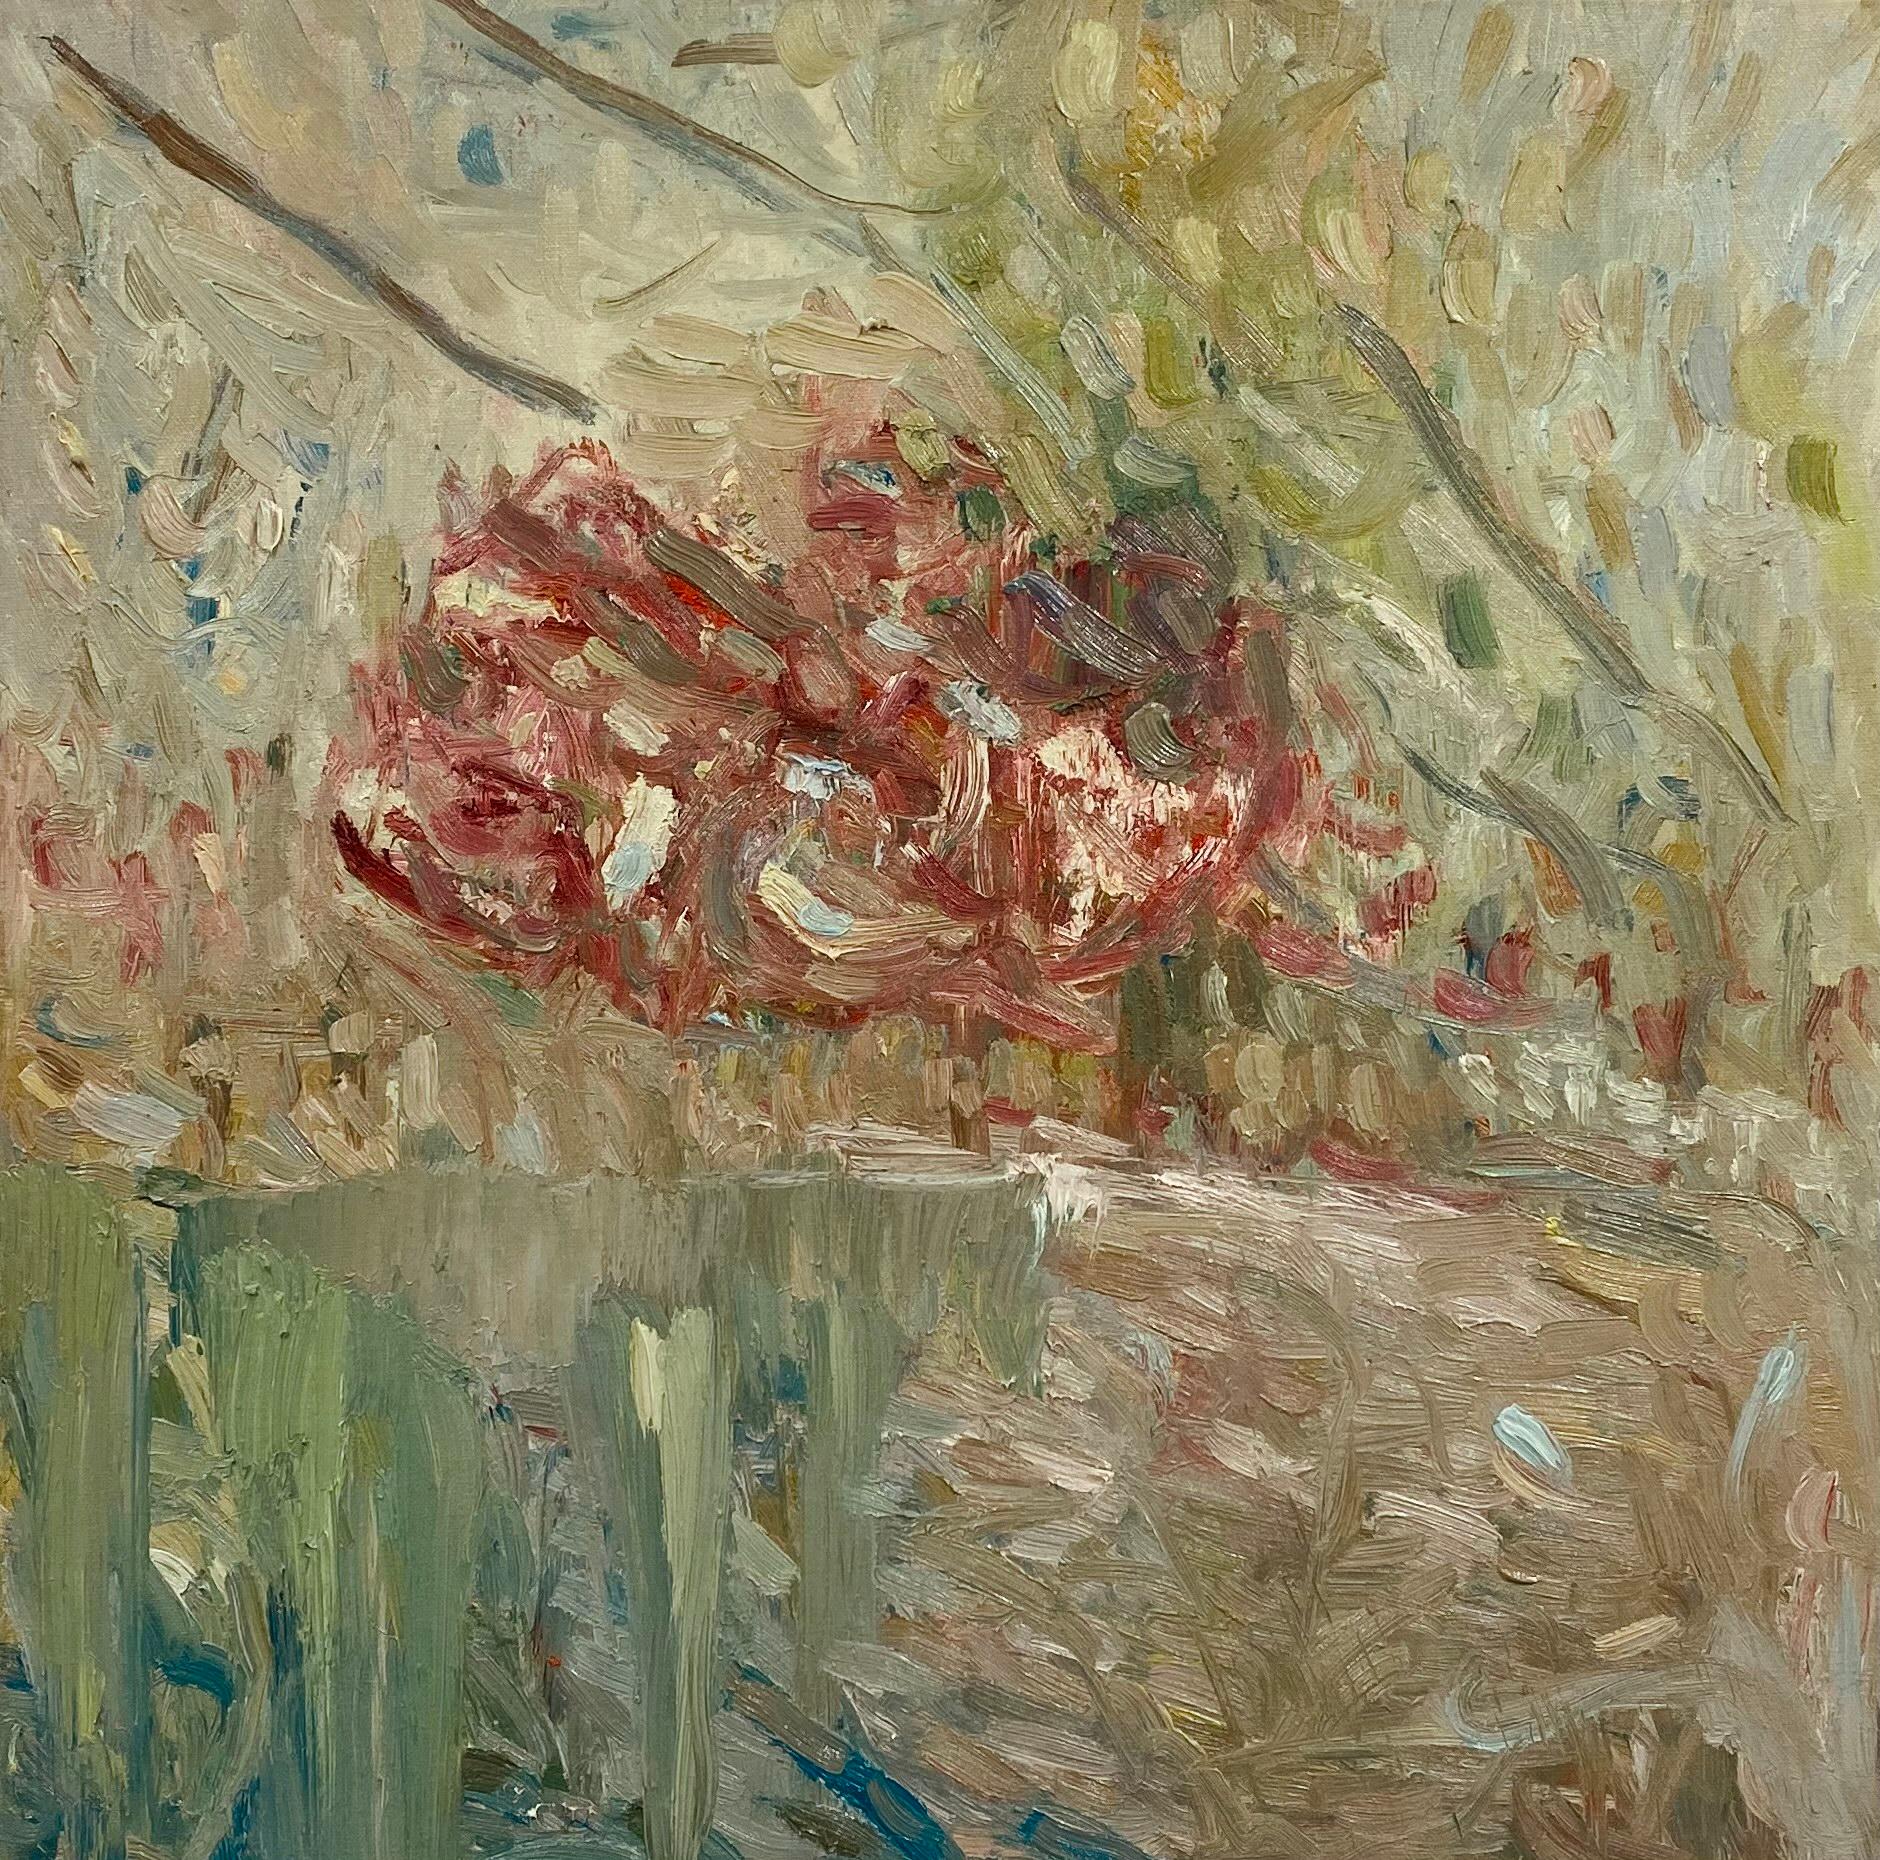 Roses In Bloom By The Lake. Abstract Expressionist Oil Painting